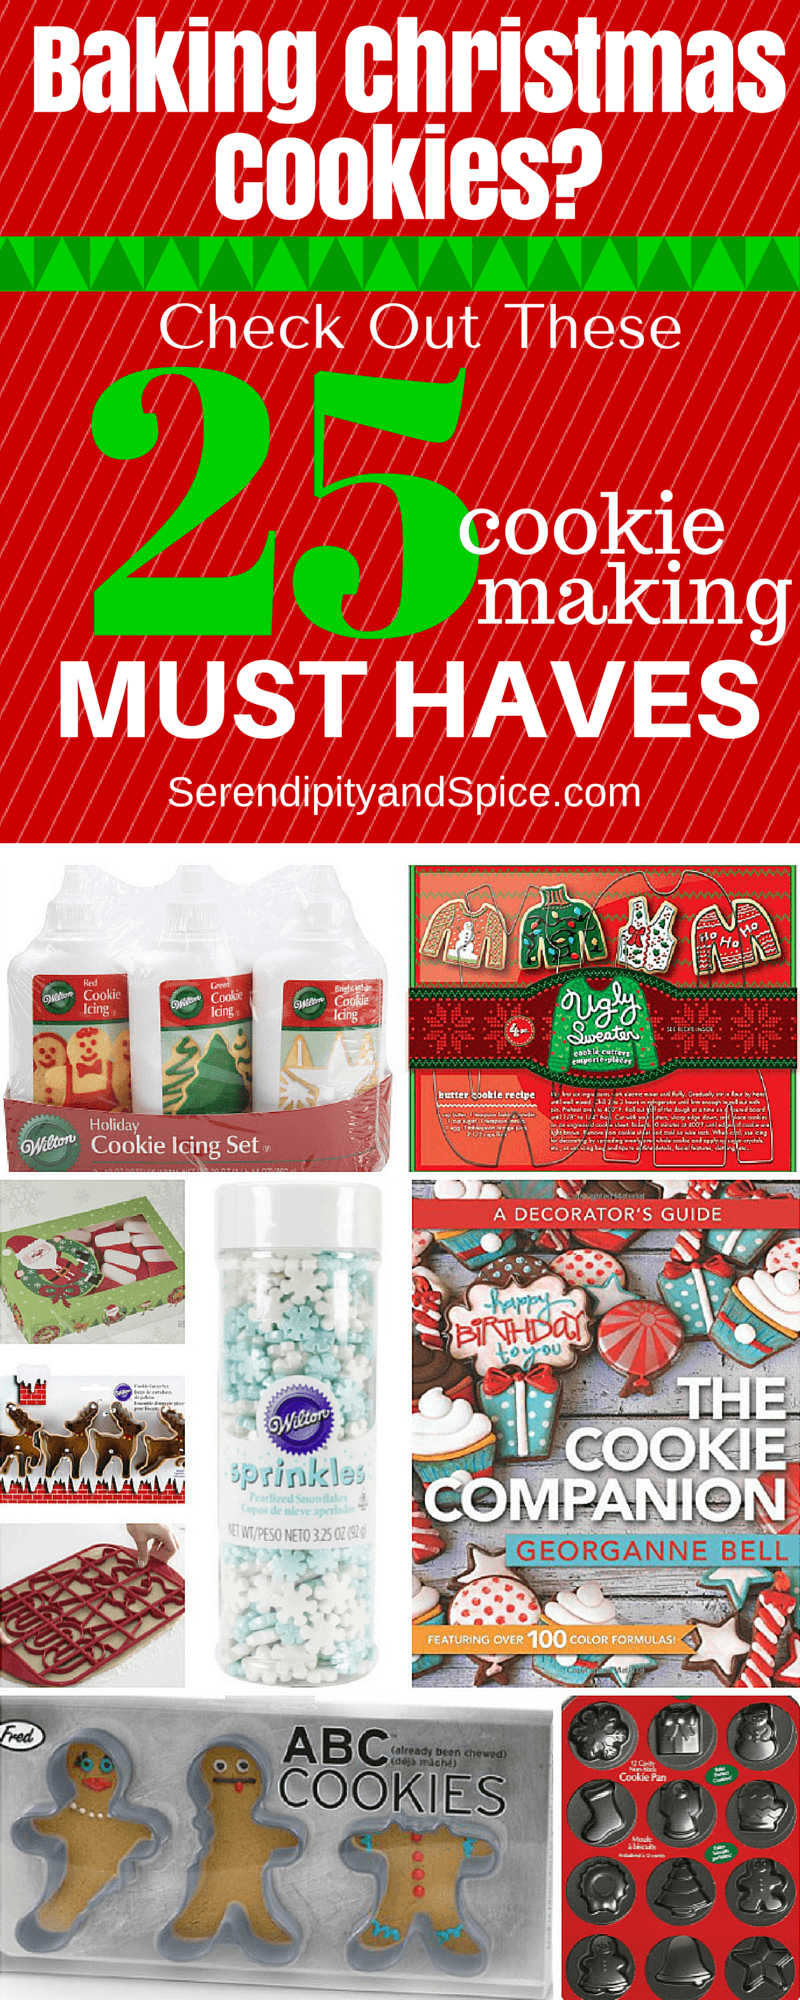 Must Have Christmas Cookie Supplies - Serendipity And Spice